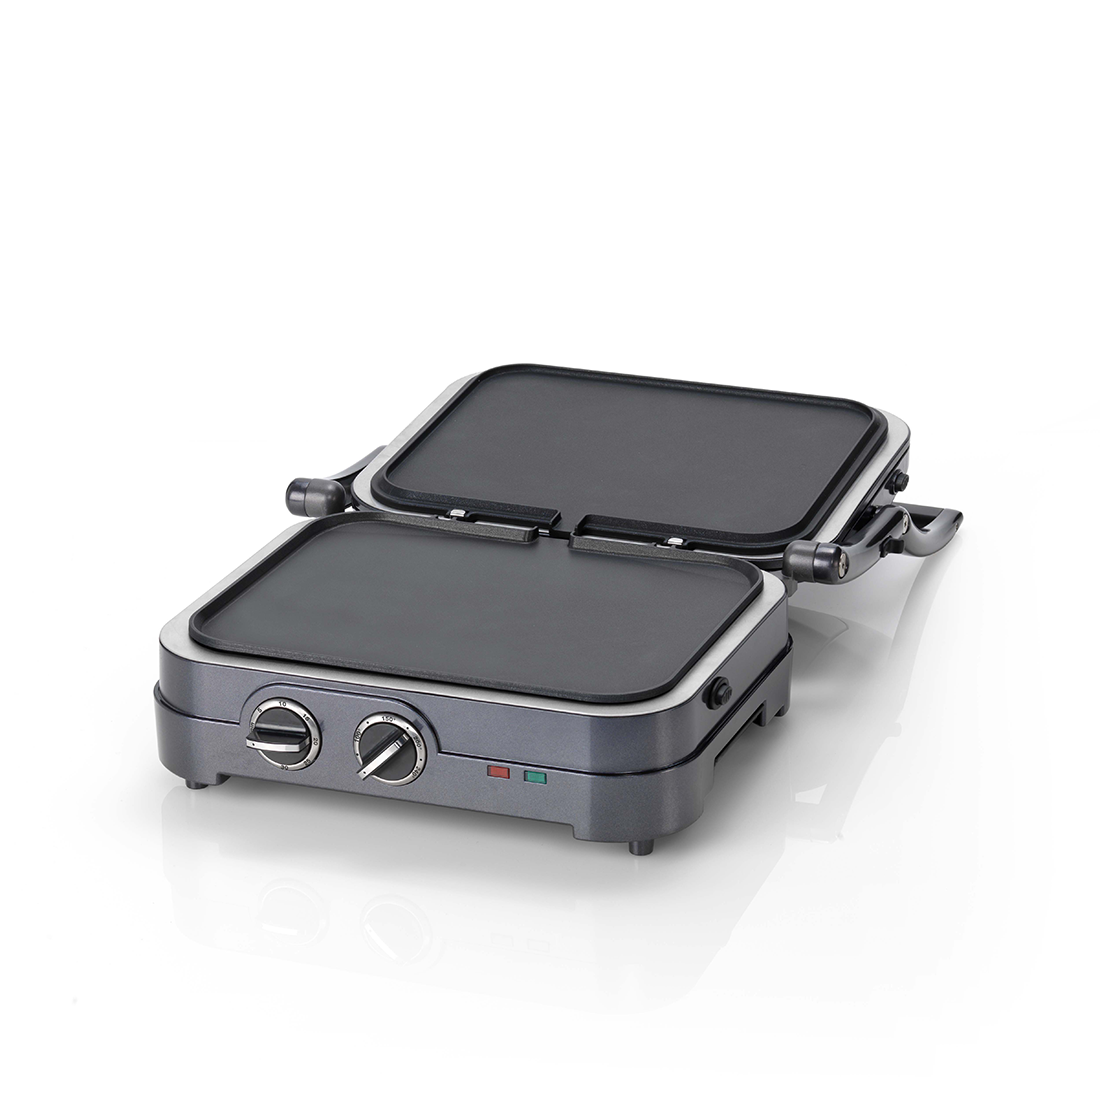 Cuisinart Griddle & Grill